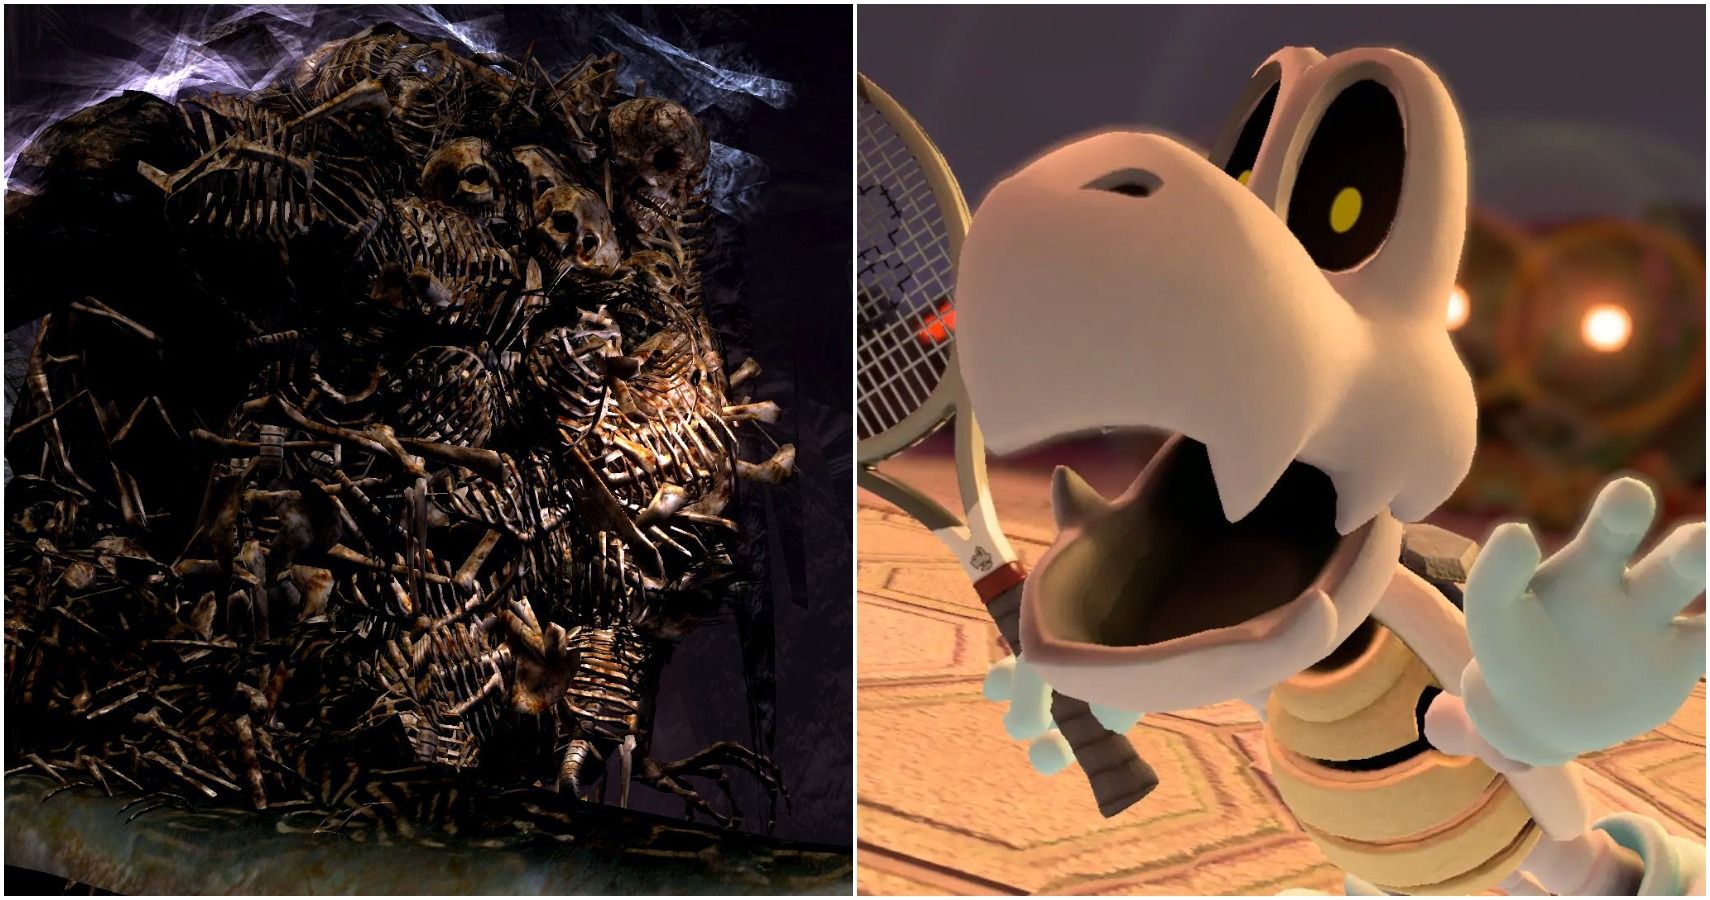 Split image of Gravelord Nito and Dry Bones.